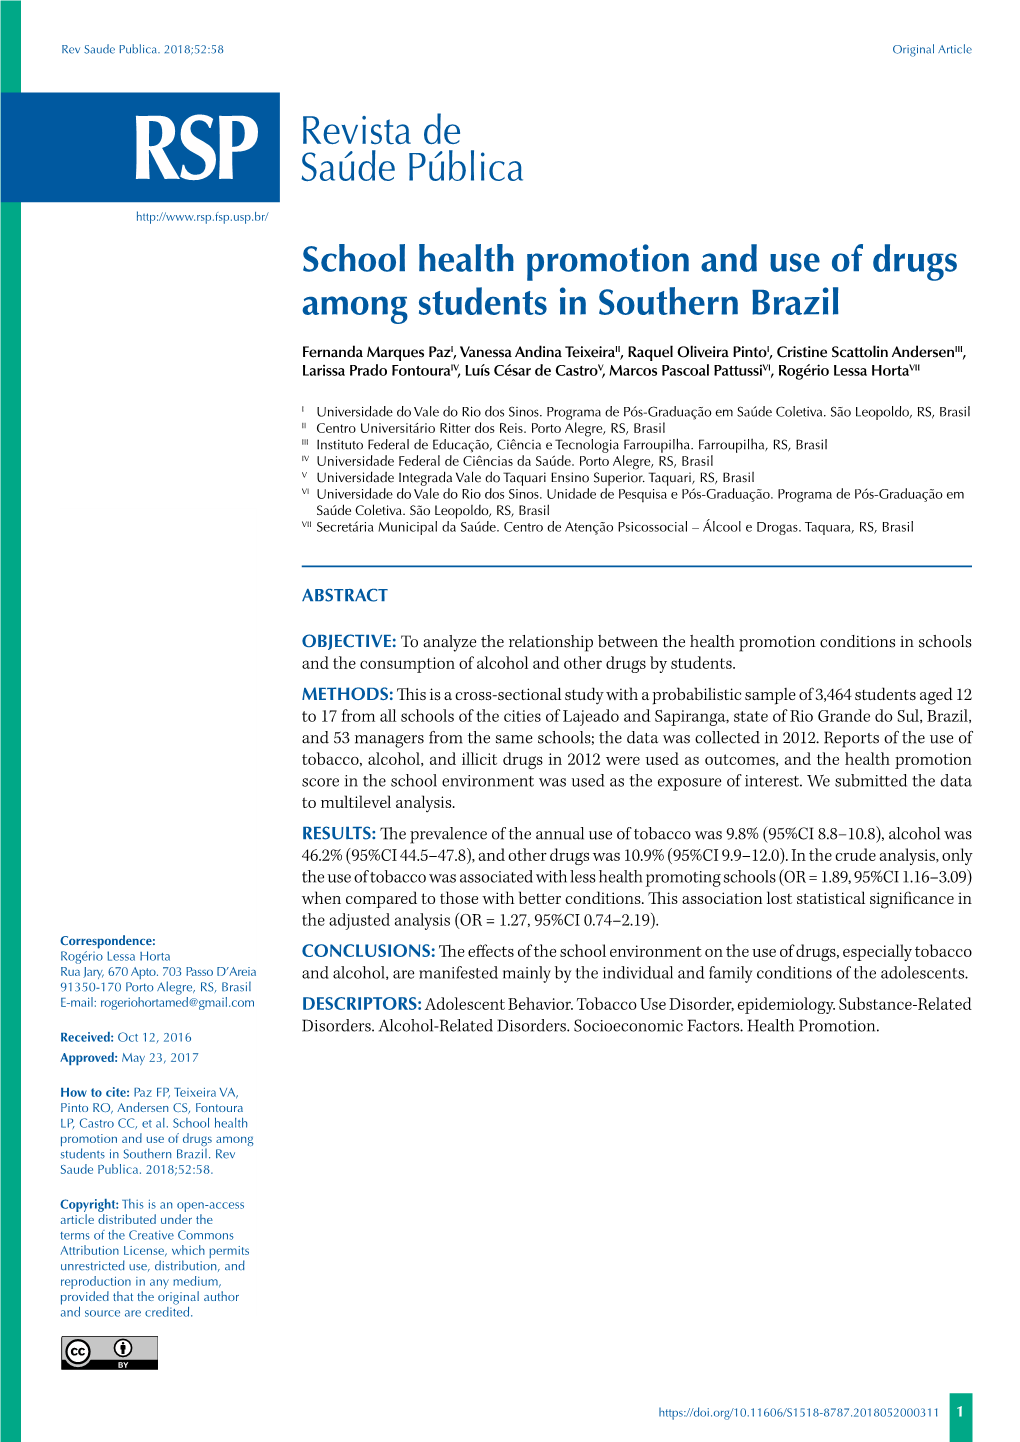 School Health Promotion and Use of Drugs Among Students in Southern Brazil